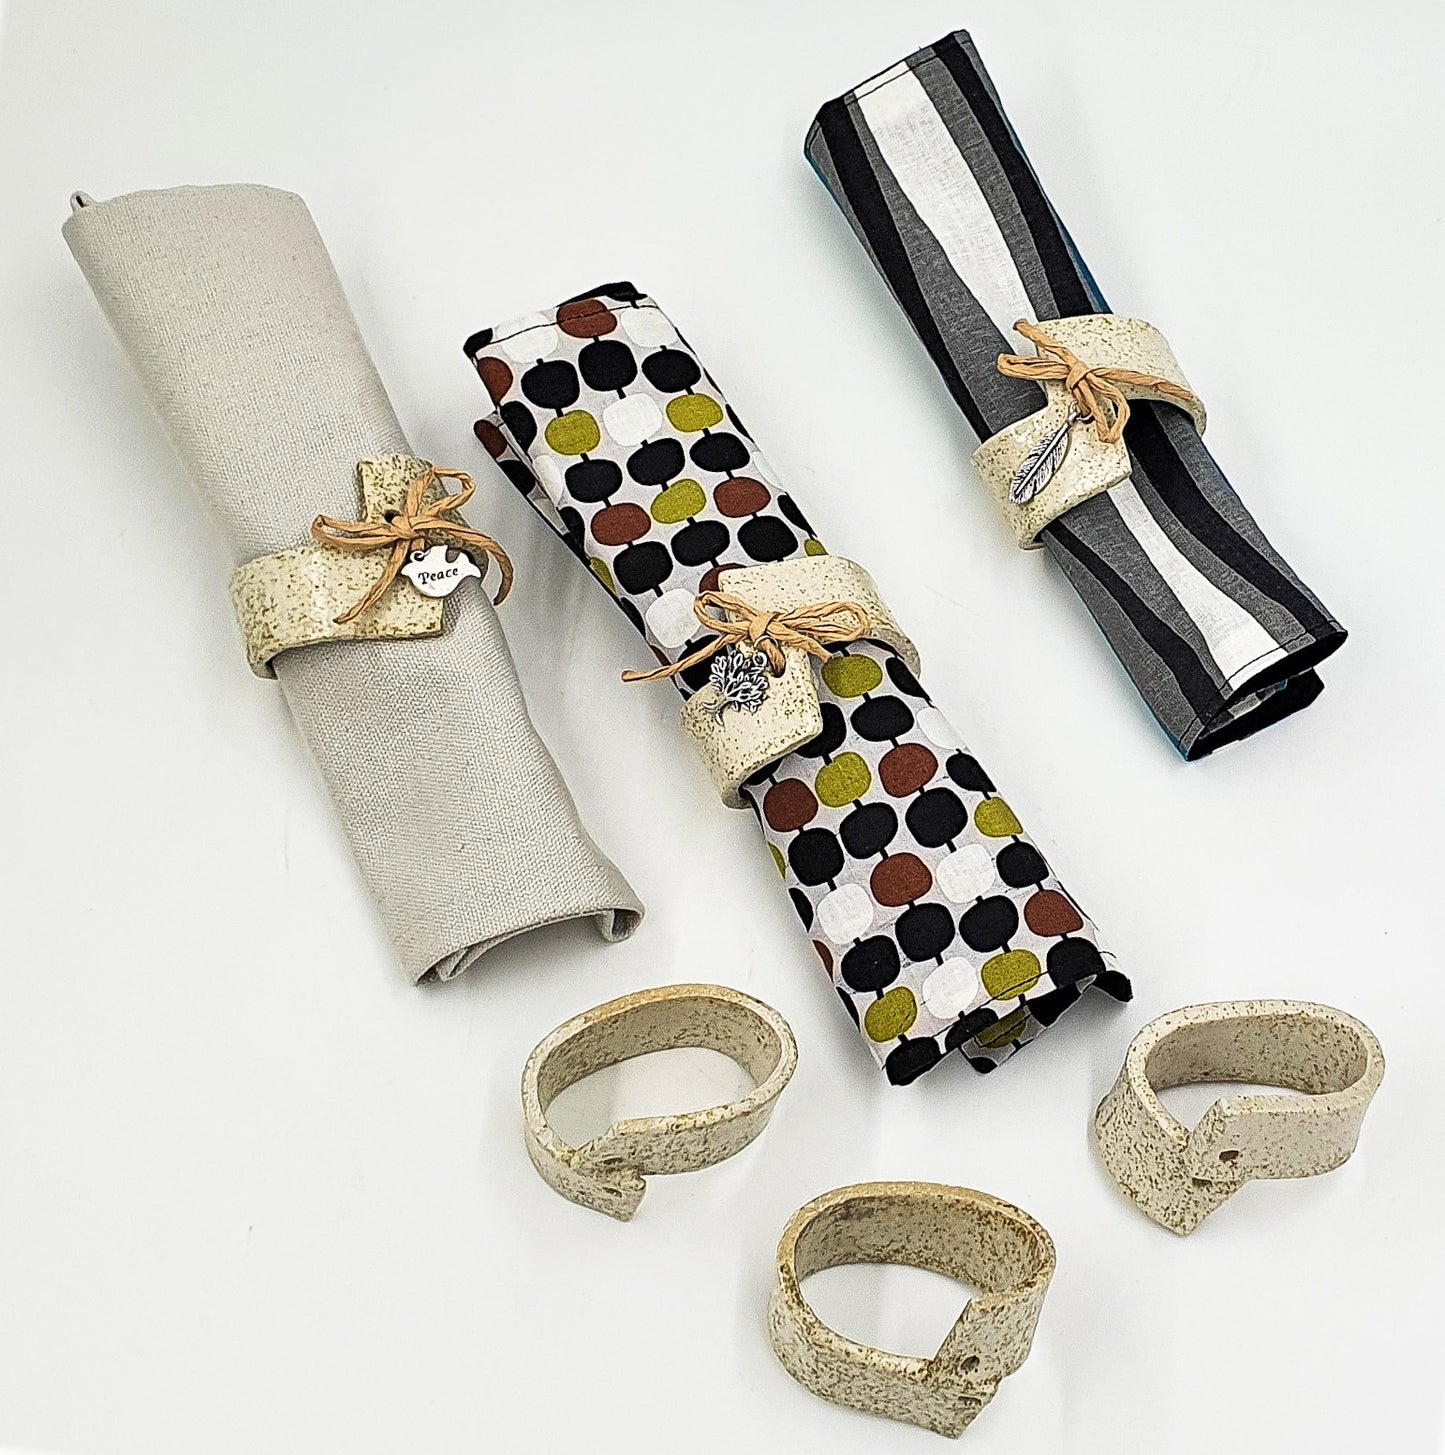 Freckles Napkin Rings (set of 6) with complimentary marker charms